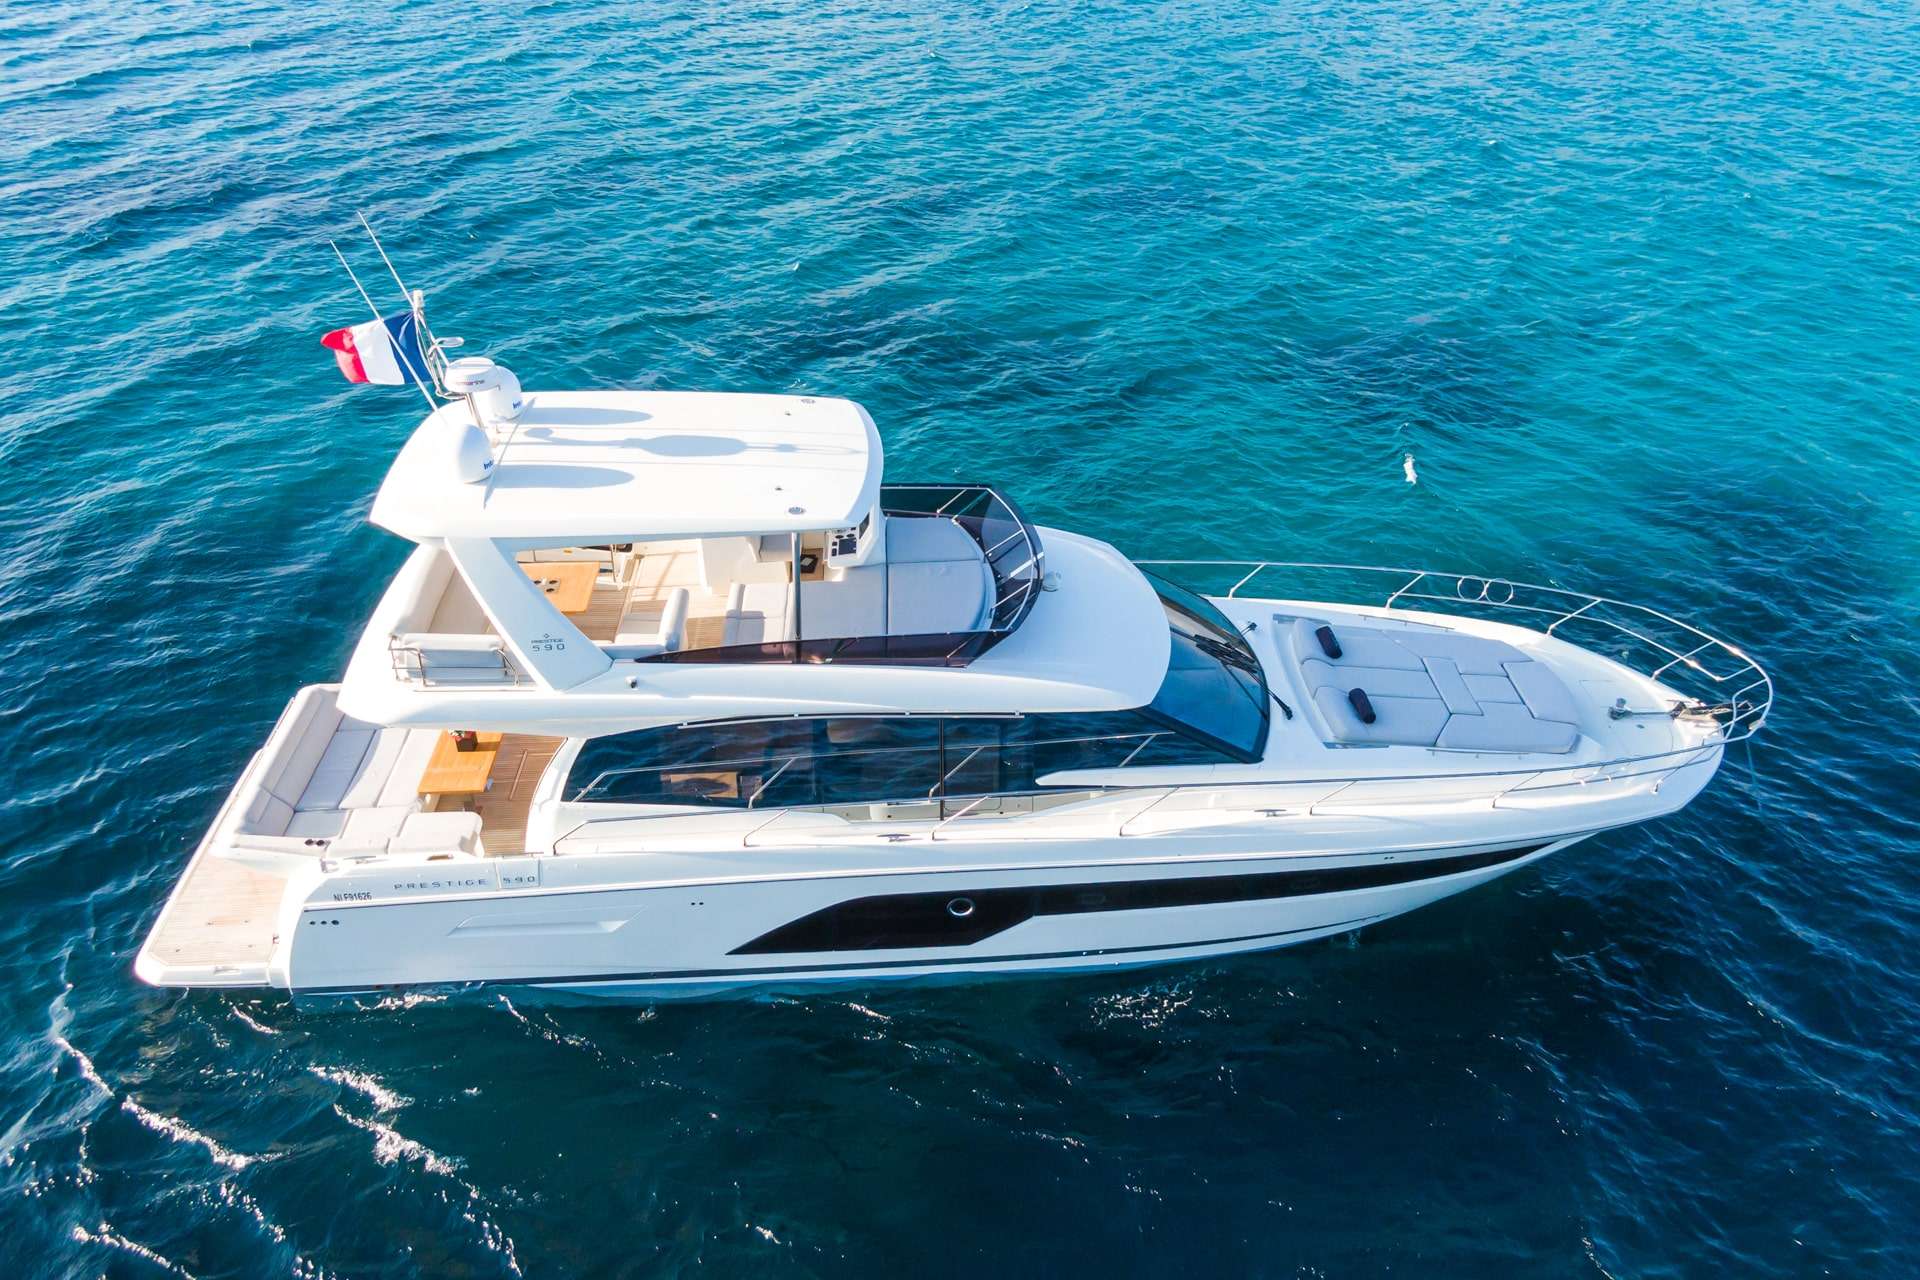 590 Fly - Motor Boat Charter France & Boat hire in France French Riviera Cannes Vieux port de Vallauris 3